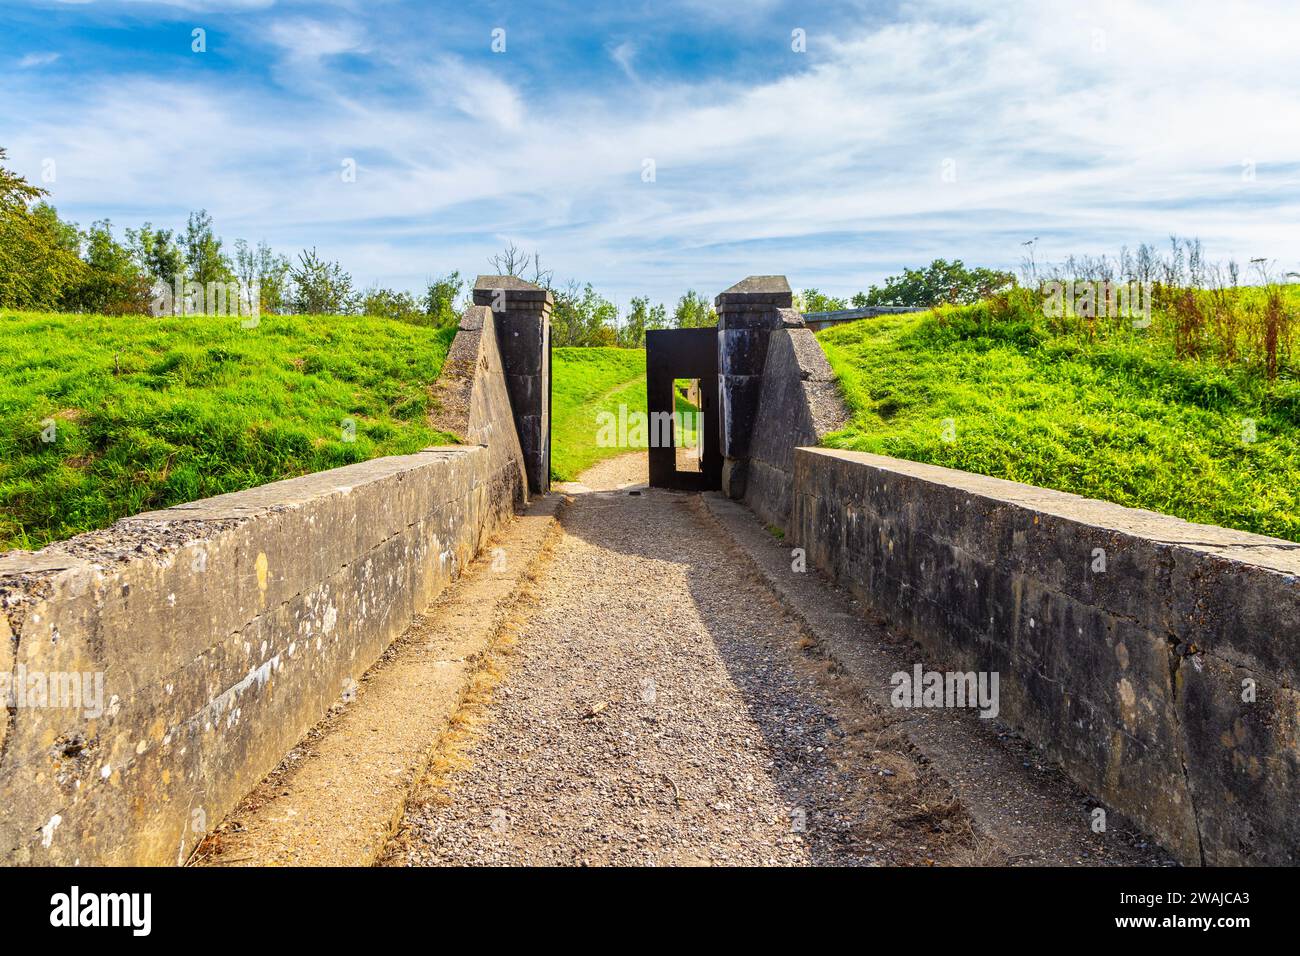 Gate to the 19th century Reigate Fort, Surrey, England Stock Photo